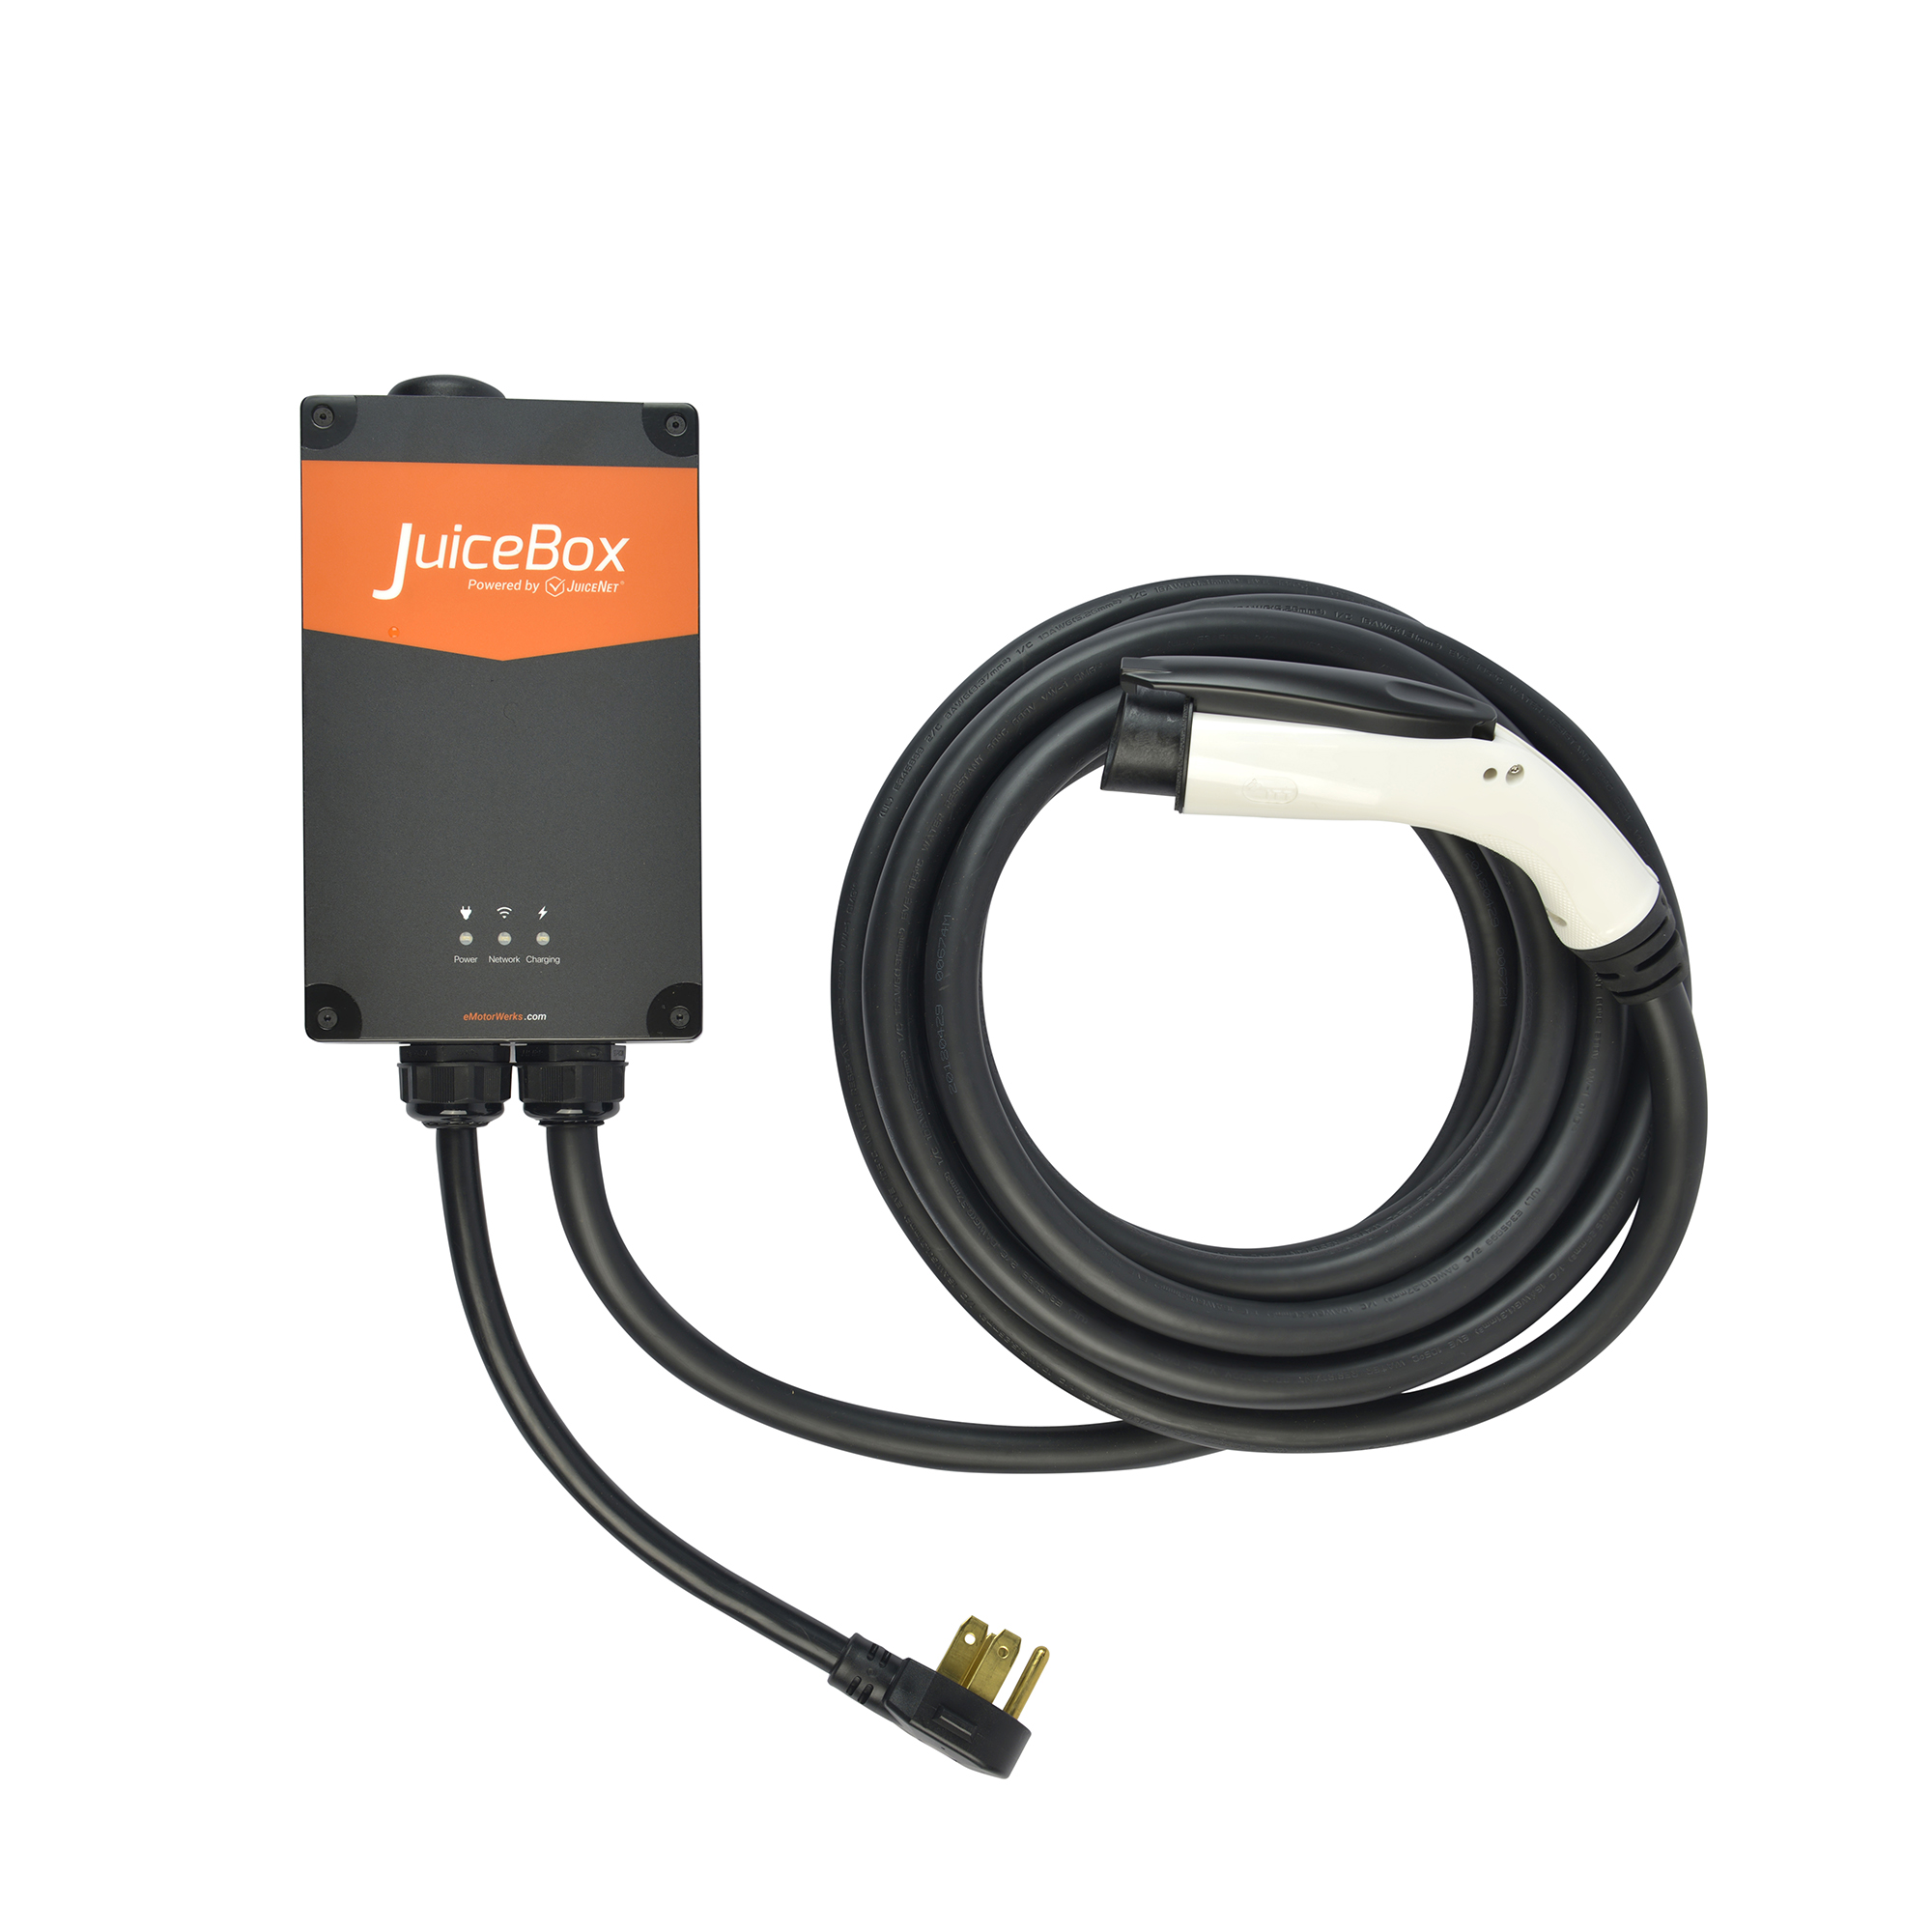 JuiceBox Pro 40 Electric Car Smart Home Charging Station - image 4 of 7